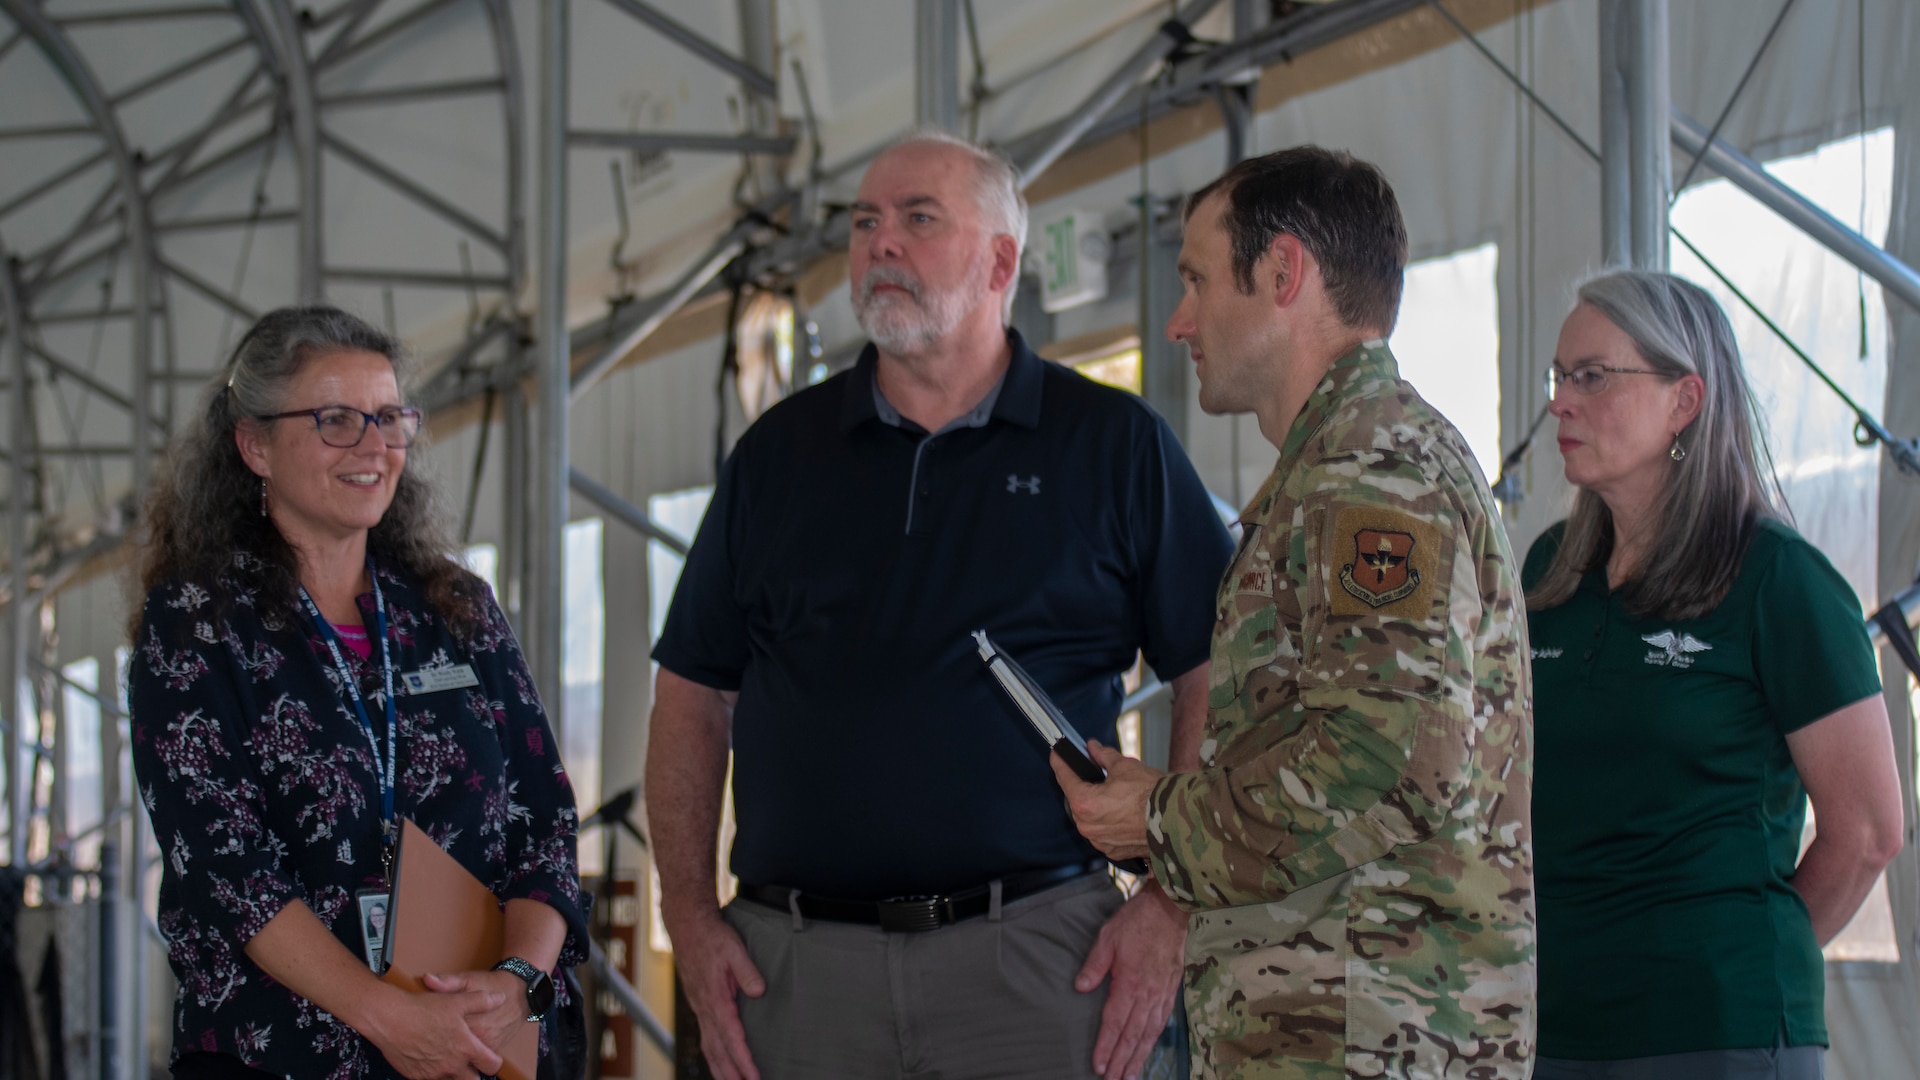 Dr. Wendy Walsh (far left), Air Education and Training Command chief learning officer, and Dr. Brian Davis (center), Second Air Force chief training officer, are briefed by Maj. Kevin Epstein (second from right), 350th Special Warfare Training Squadron commander, and Dr. Karal Garcia (far right), Special Warfare Training Group training advisor, on the Special Warfare Training Wing Pre-Dive Course at Chaparral Pool at Joint Base San Antonio-Lackland, Texas, April 5, 2022. Walsh and her team participated in an immersion tour of the SWTW to learn about how the SWTW builds Air Force Special Warfare Airmen and prepares them for combat.